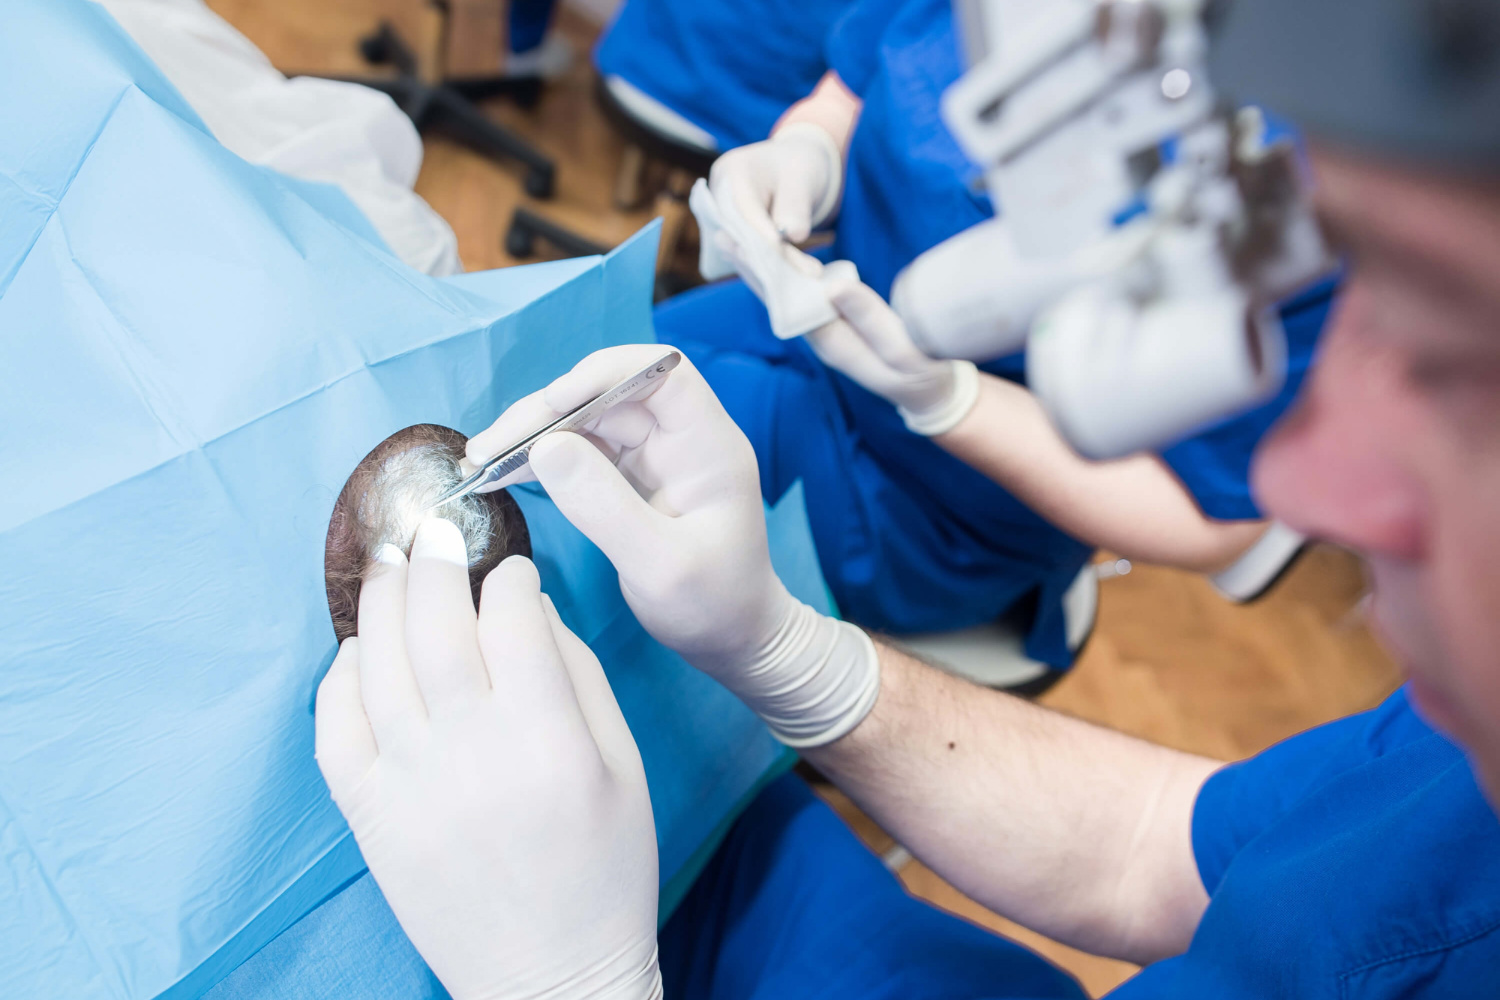 Dr. Markovina performs hair transplantation with the FUE method